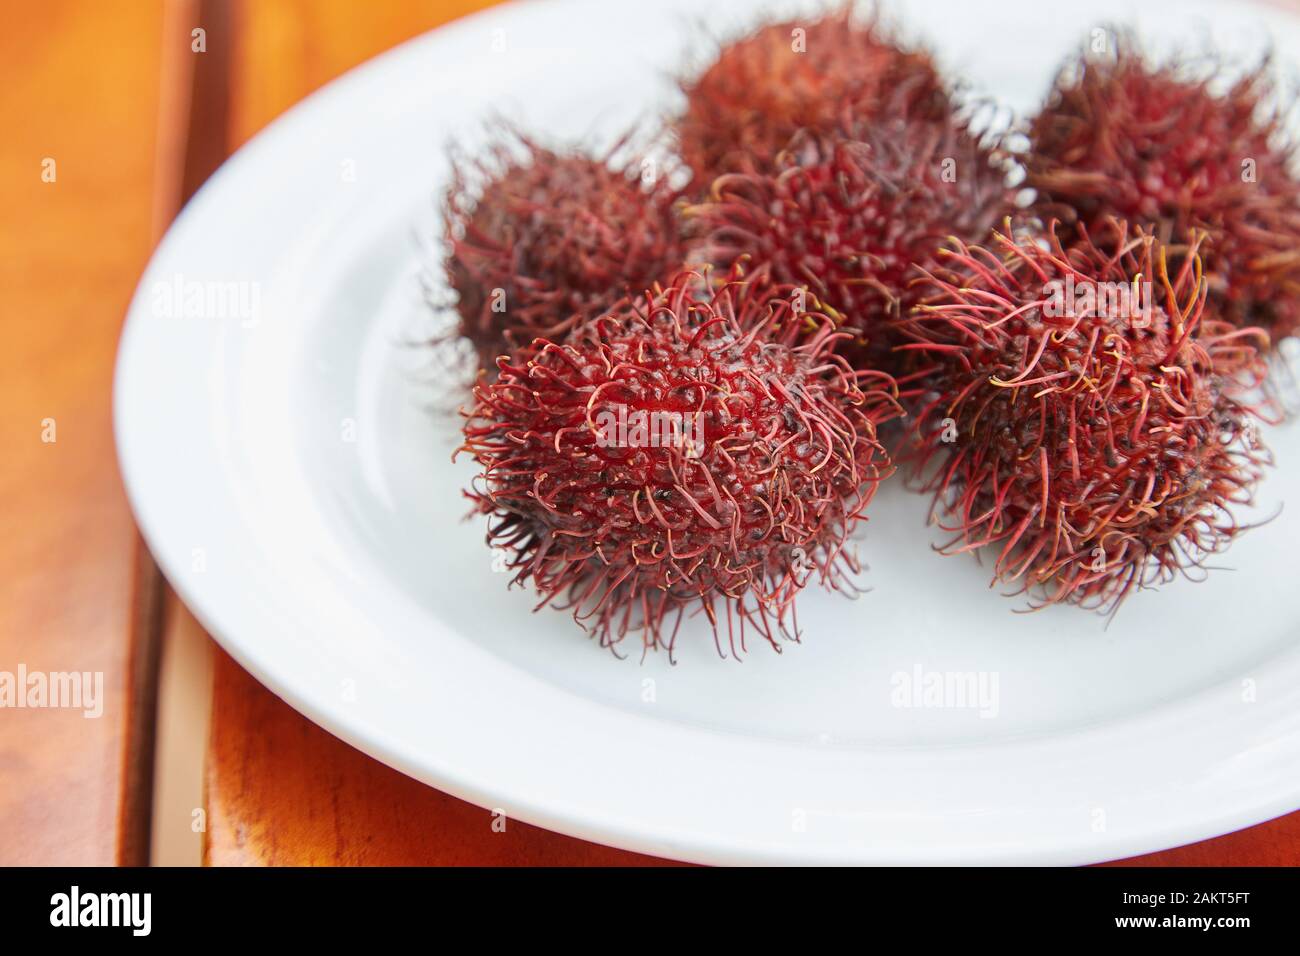 A plate of Rambutans, a spiky red fruit. Stock Photo